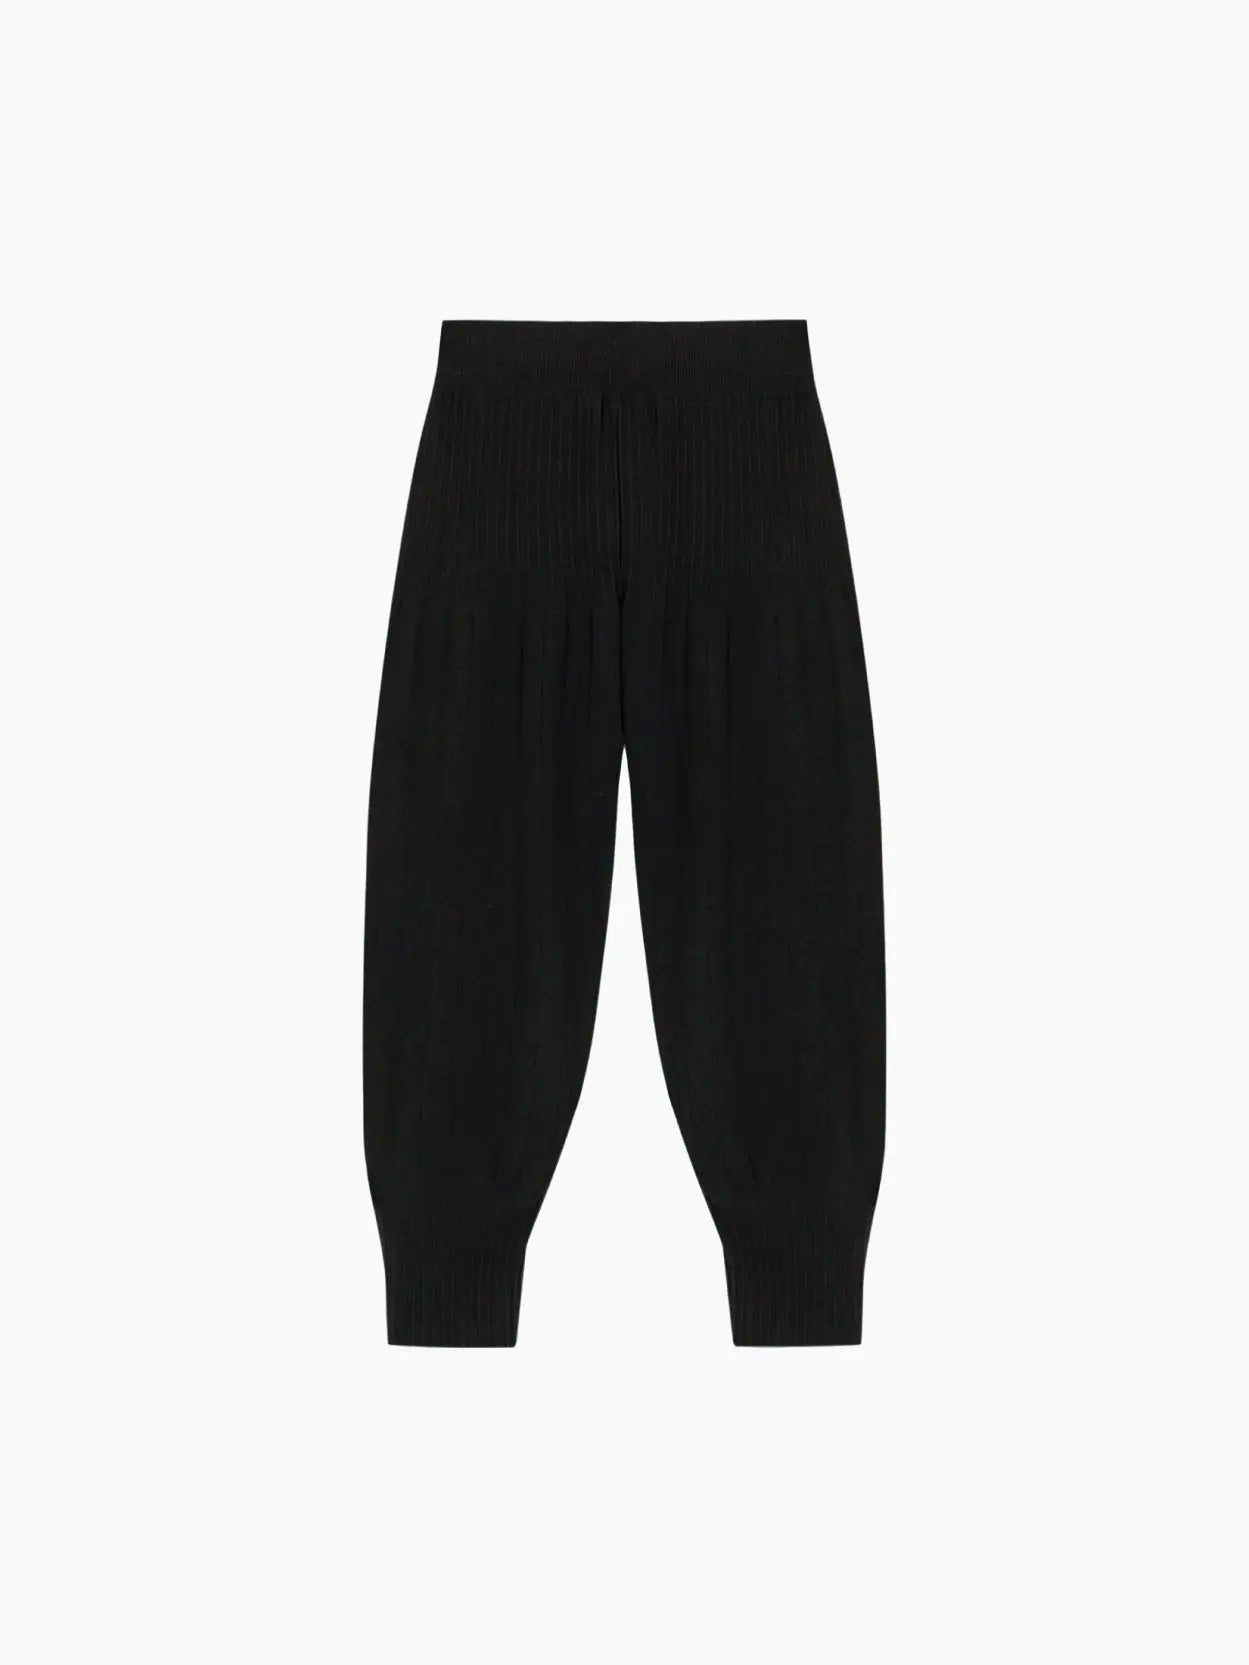 A pair of Viscose Pleated Pants Black by Cordera with a high, elastic waistband and gathered ankles. The fabric appears to be lightweight and comfortable, perfect for casual wear. Displayed against a plain white background, these stylish pants are available at Bassalstore in Barcelona.